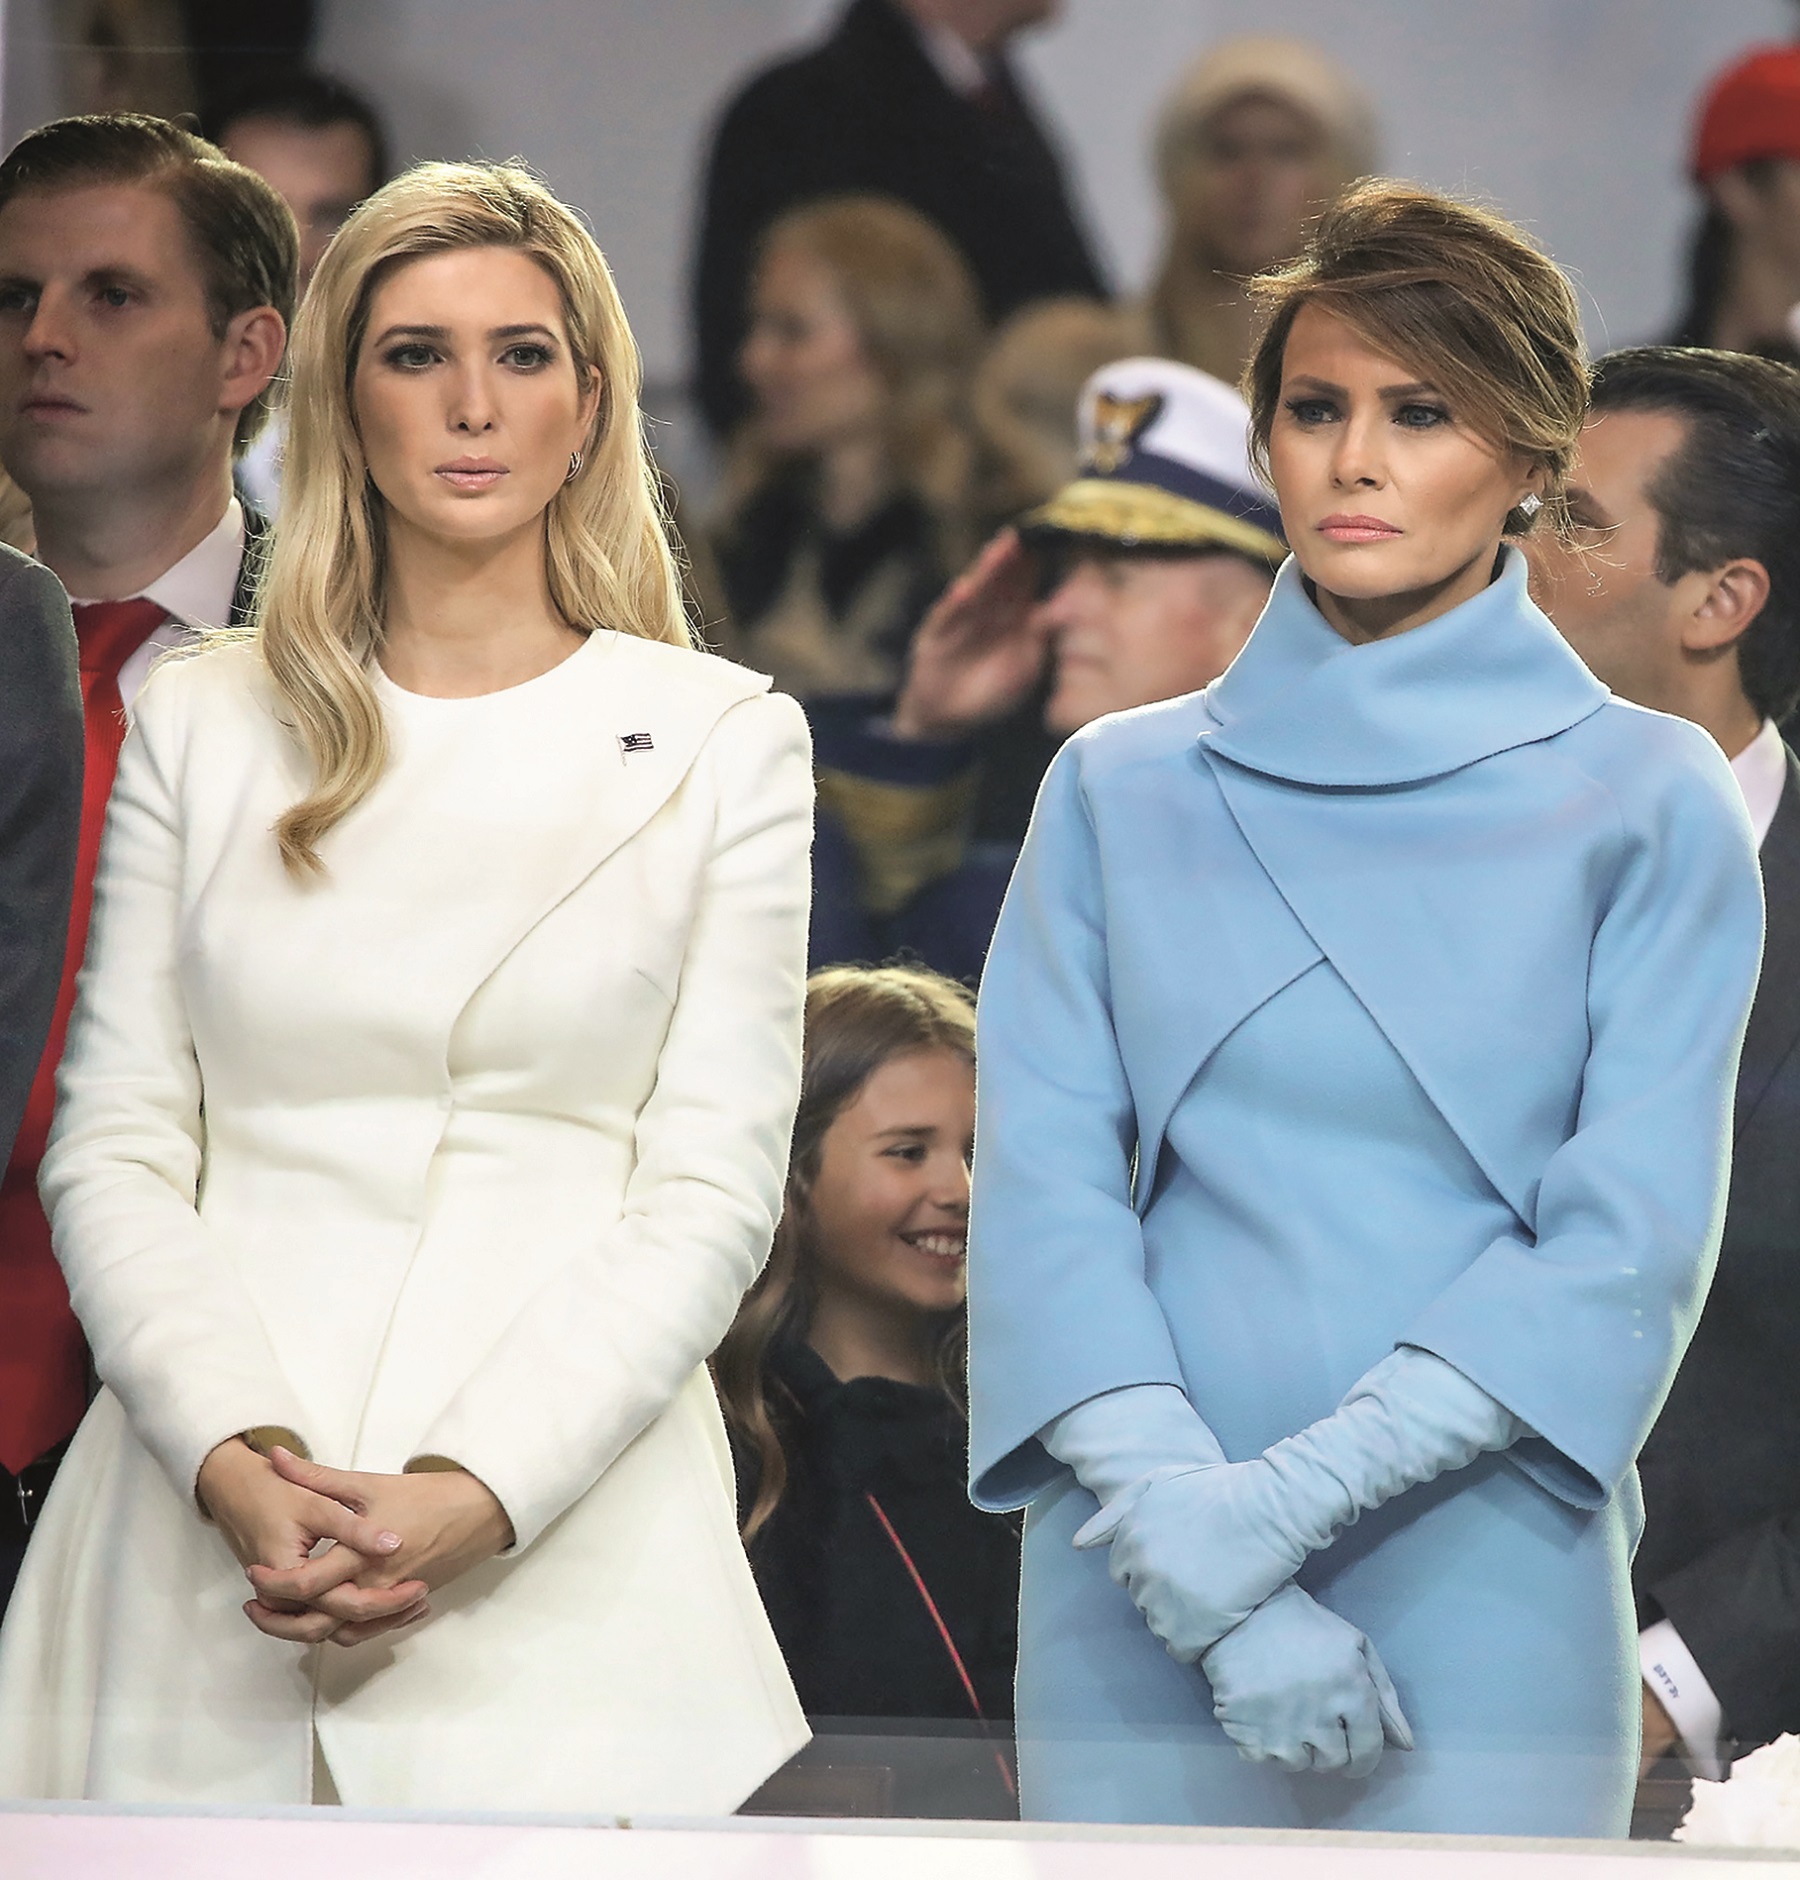 WASHINGTON, DC - JANUARY 20: First lady Melania Trump (R), stands with Ivanka Trump as a parade passes the inaugural parade reviewing stand in front of the White House on January 20, 2017 in Washington, DC. Donald Trump was sworn in as the nation's 45th president today.  (Photo by Mark Wilson/Getty Images)